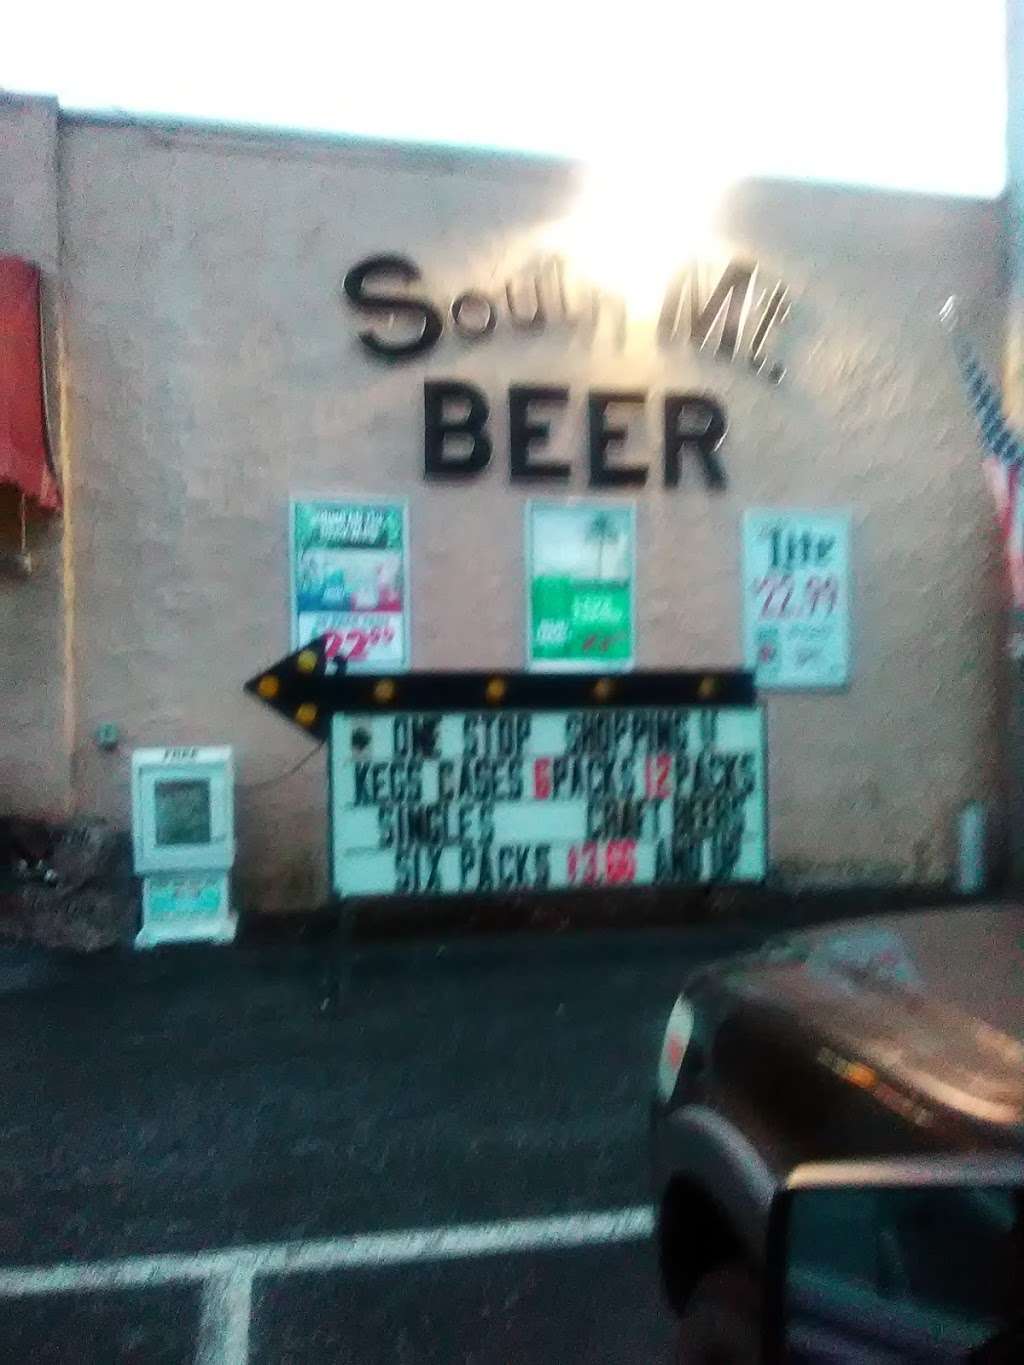 South Mountain Beer Distribution Co | 5104 E Penn Ave, Wernersville, PA 19565 | Phone: (610) 678-8001